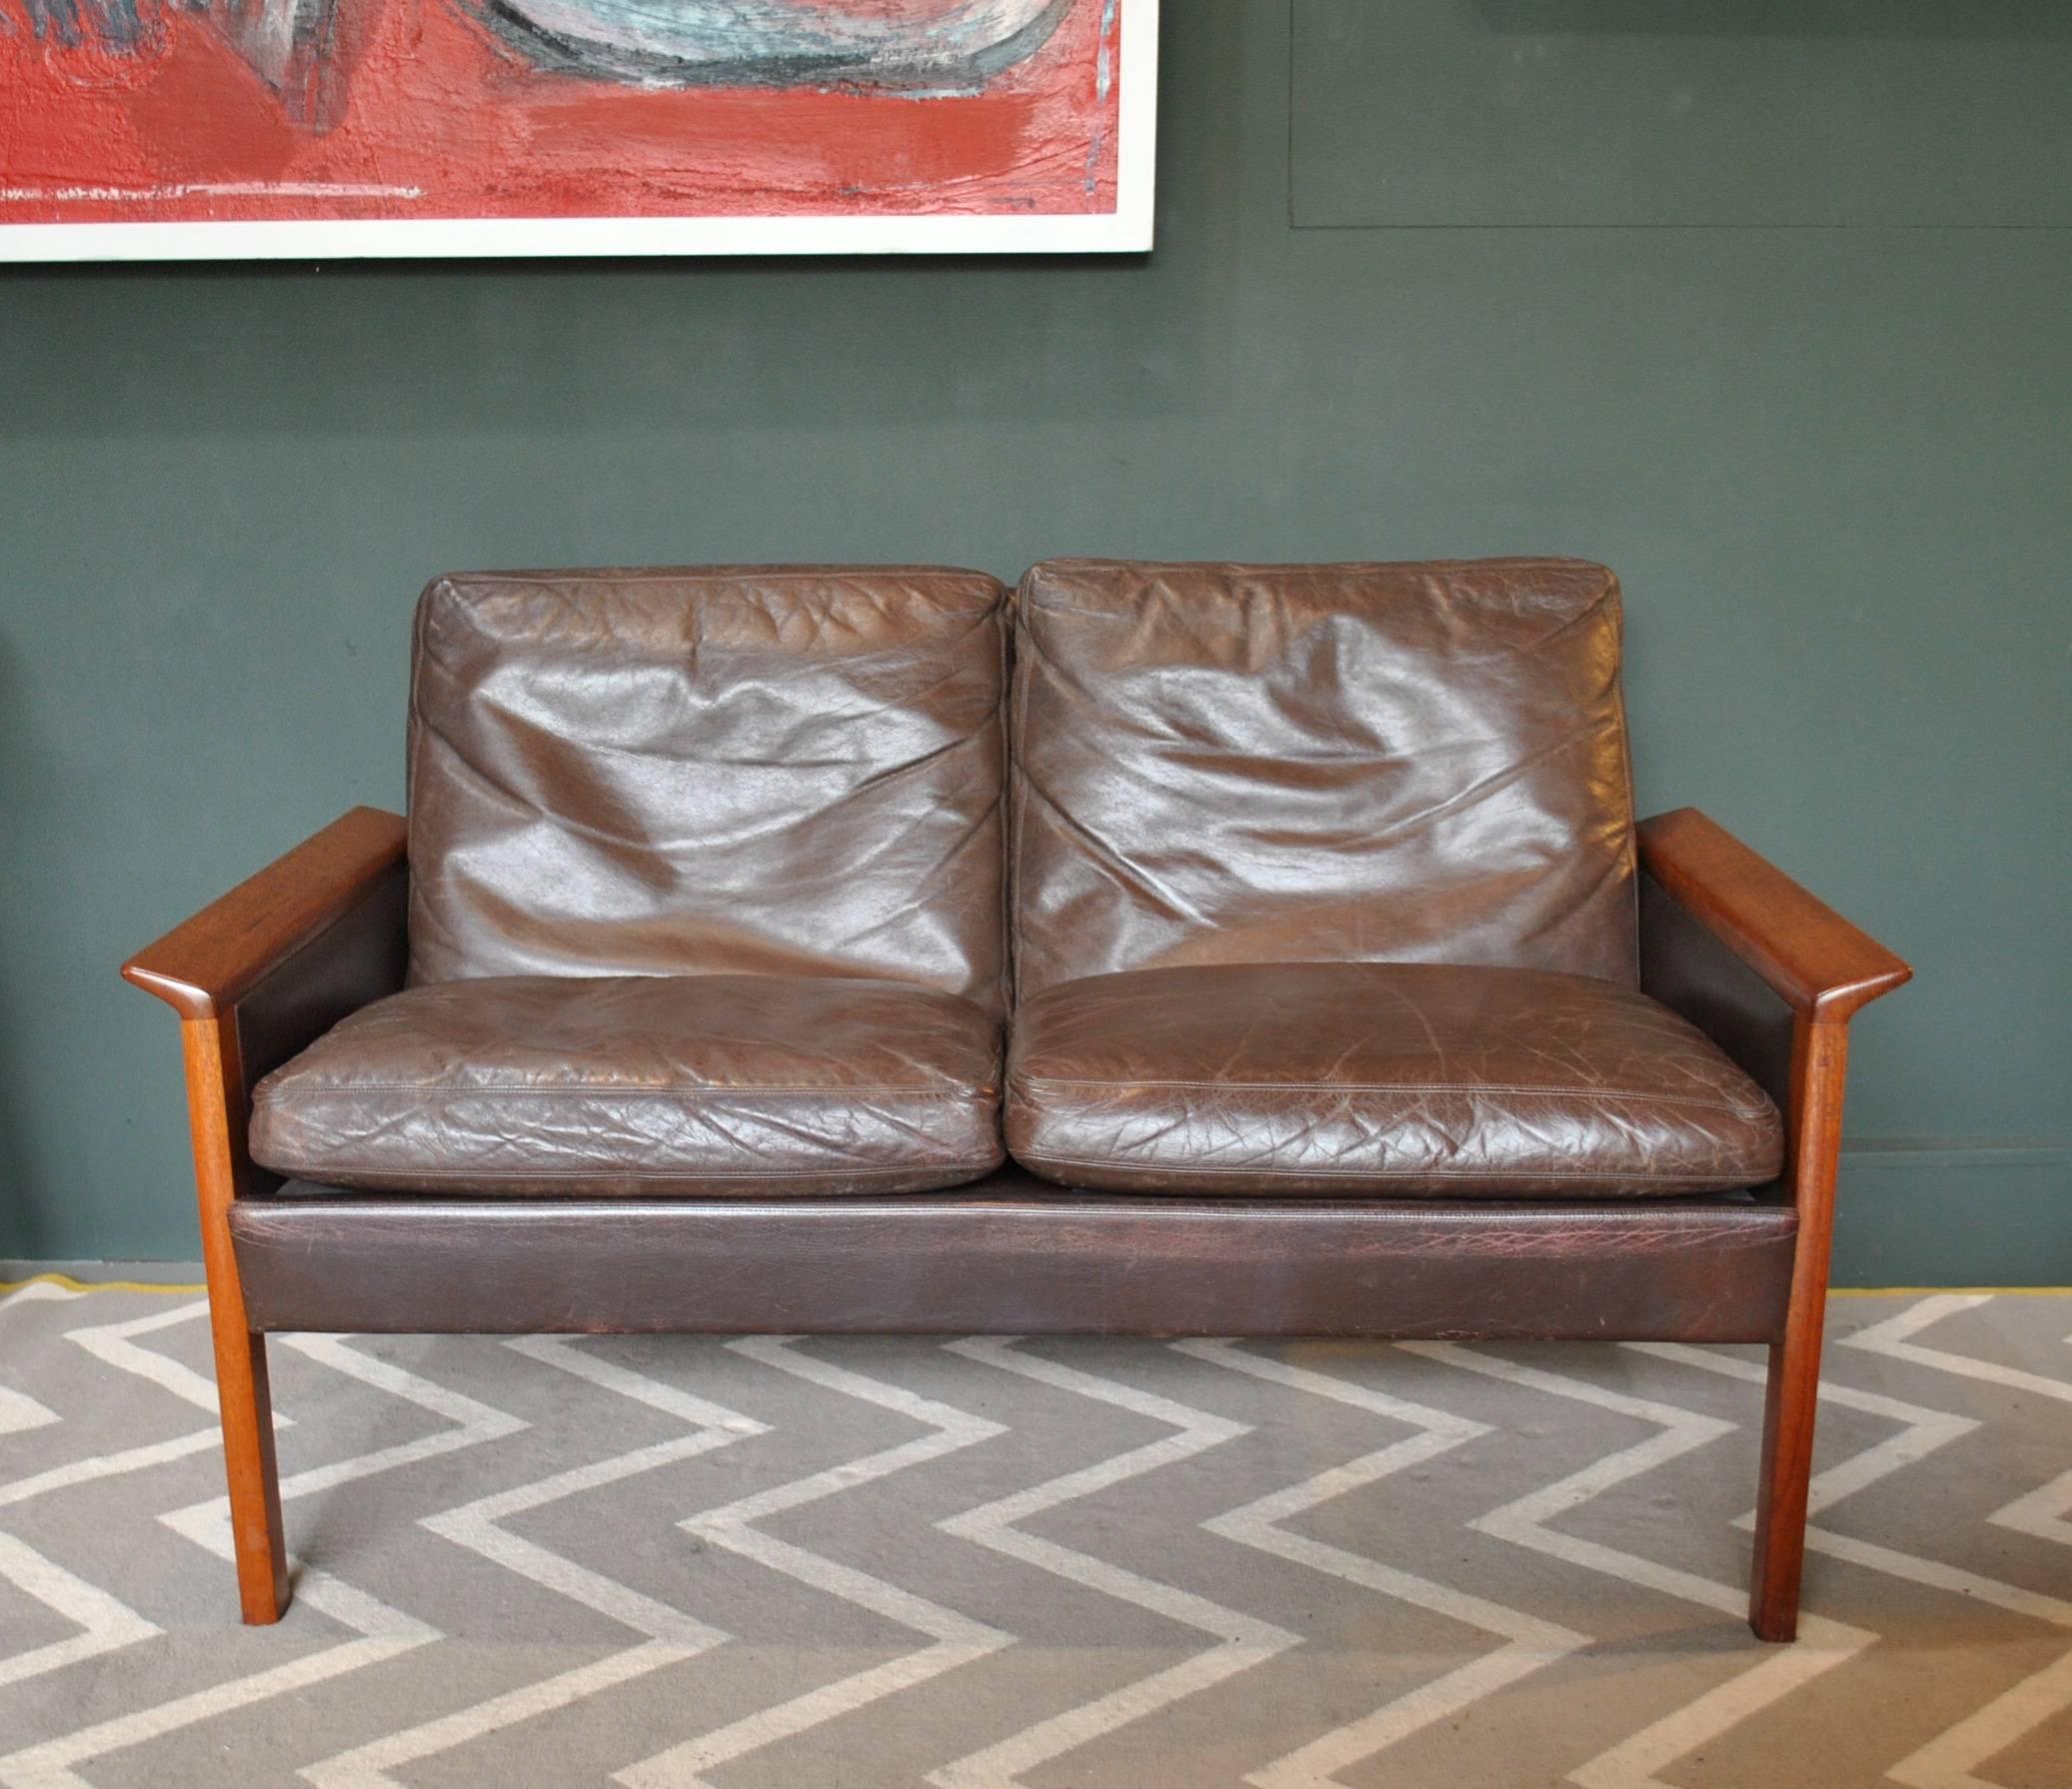 Rare teak frame model 500 two-seat sofa. This was designed by Hans Olsen for C.S Mobler, Denmark circa 1960. Mid-dark brown original patinated leather upholstery. This has been thoroughly cleaned and conditioned throughout. The teak frame has been